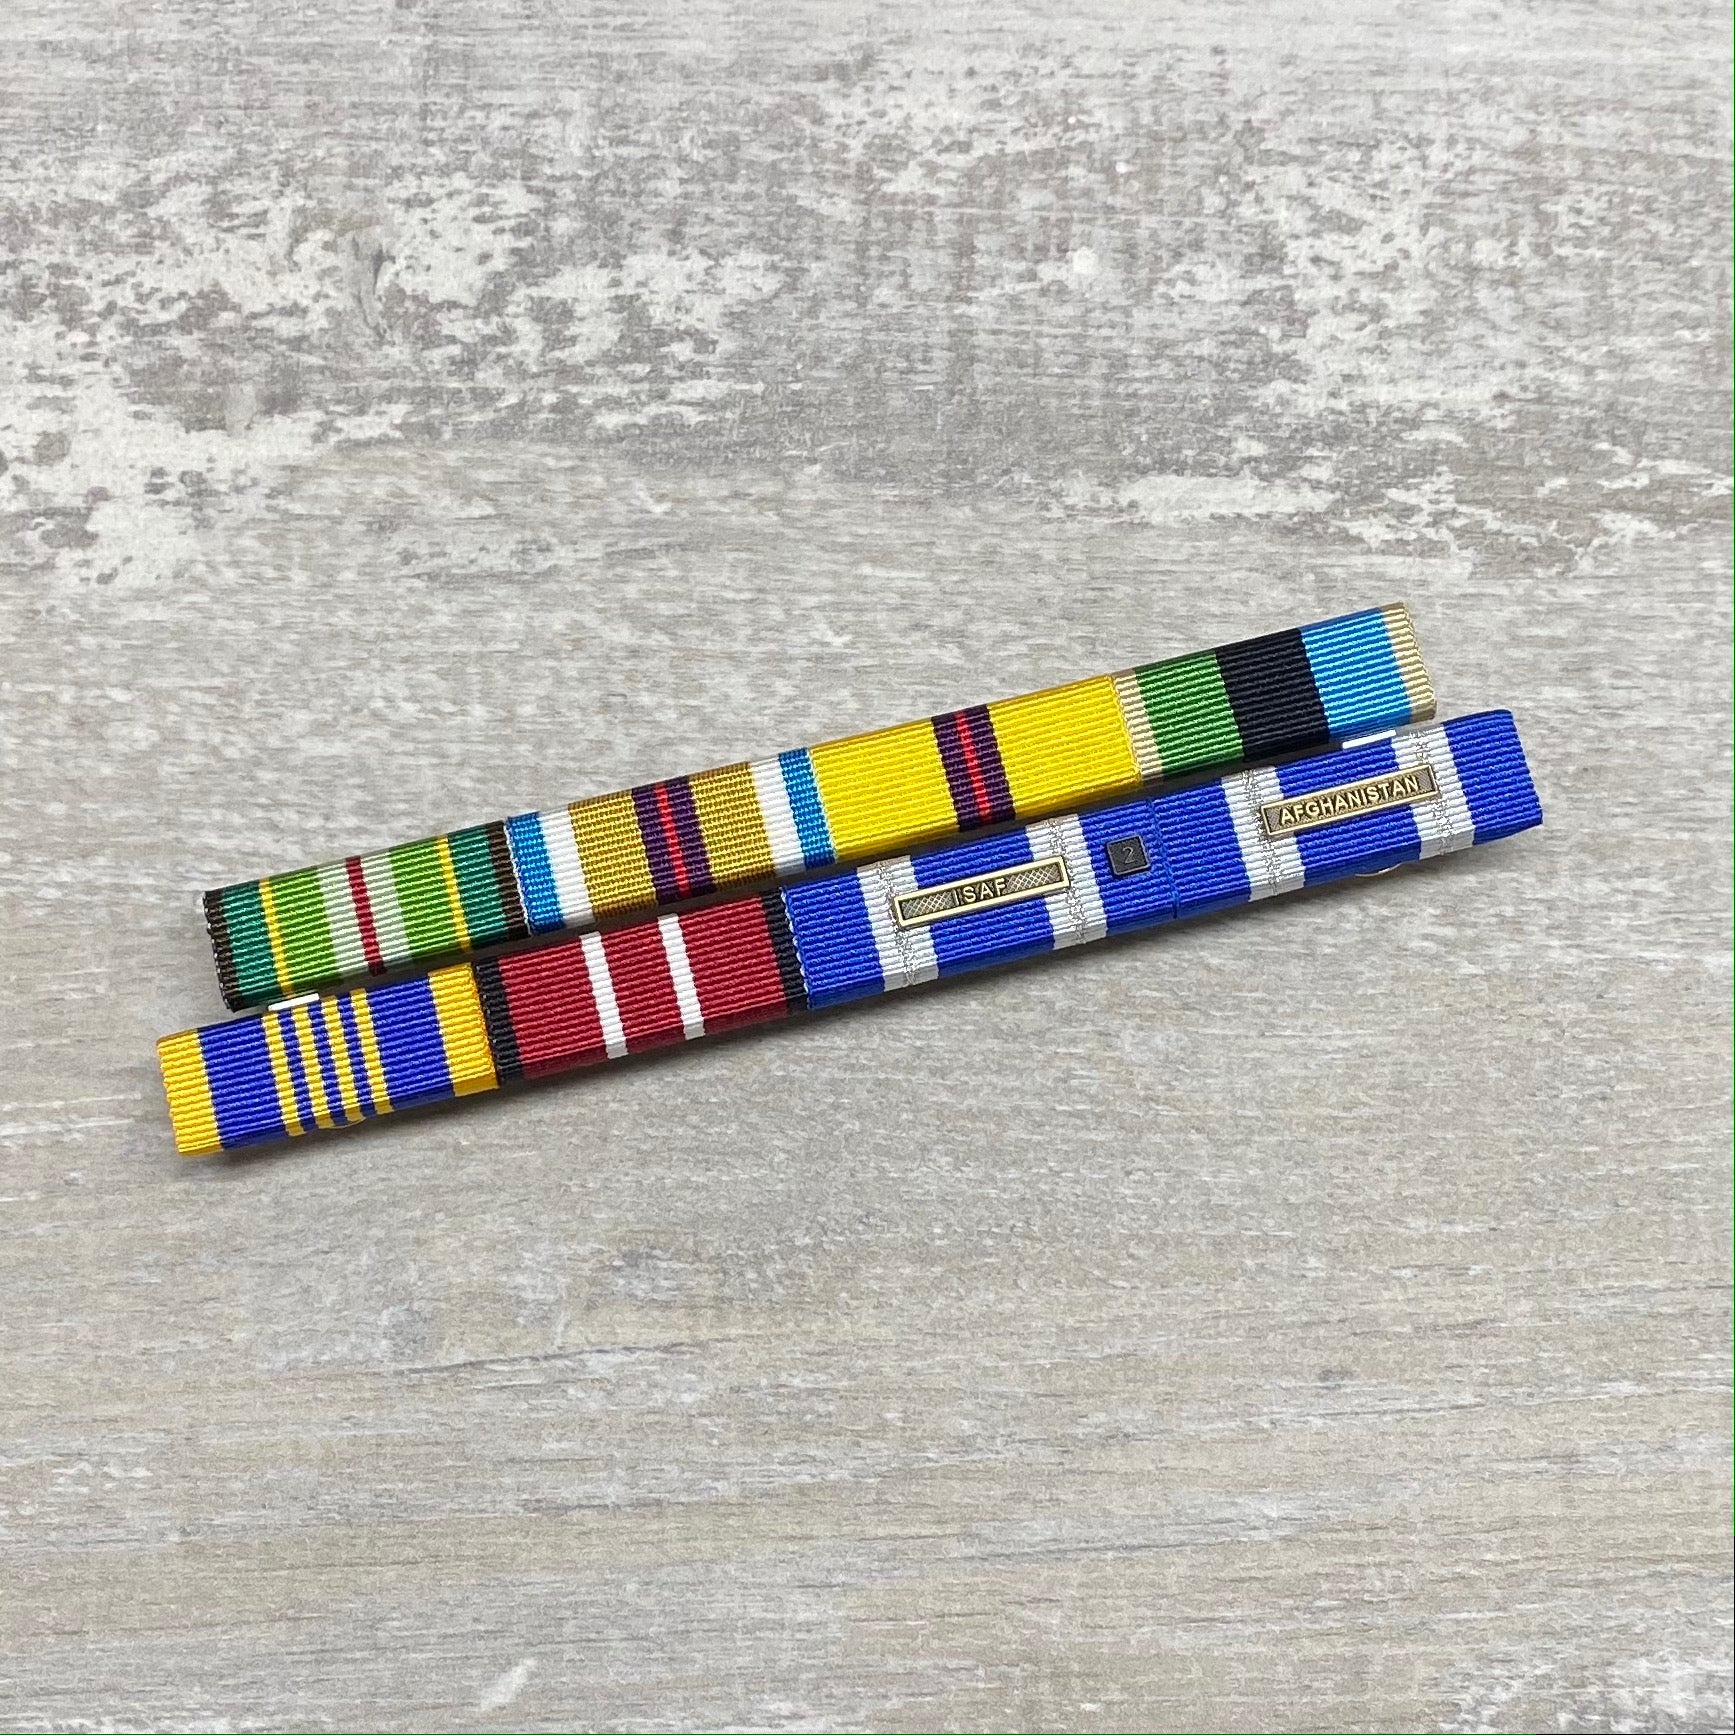 Ribbon Bars - Joining - Foxhole Medals